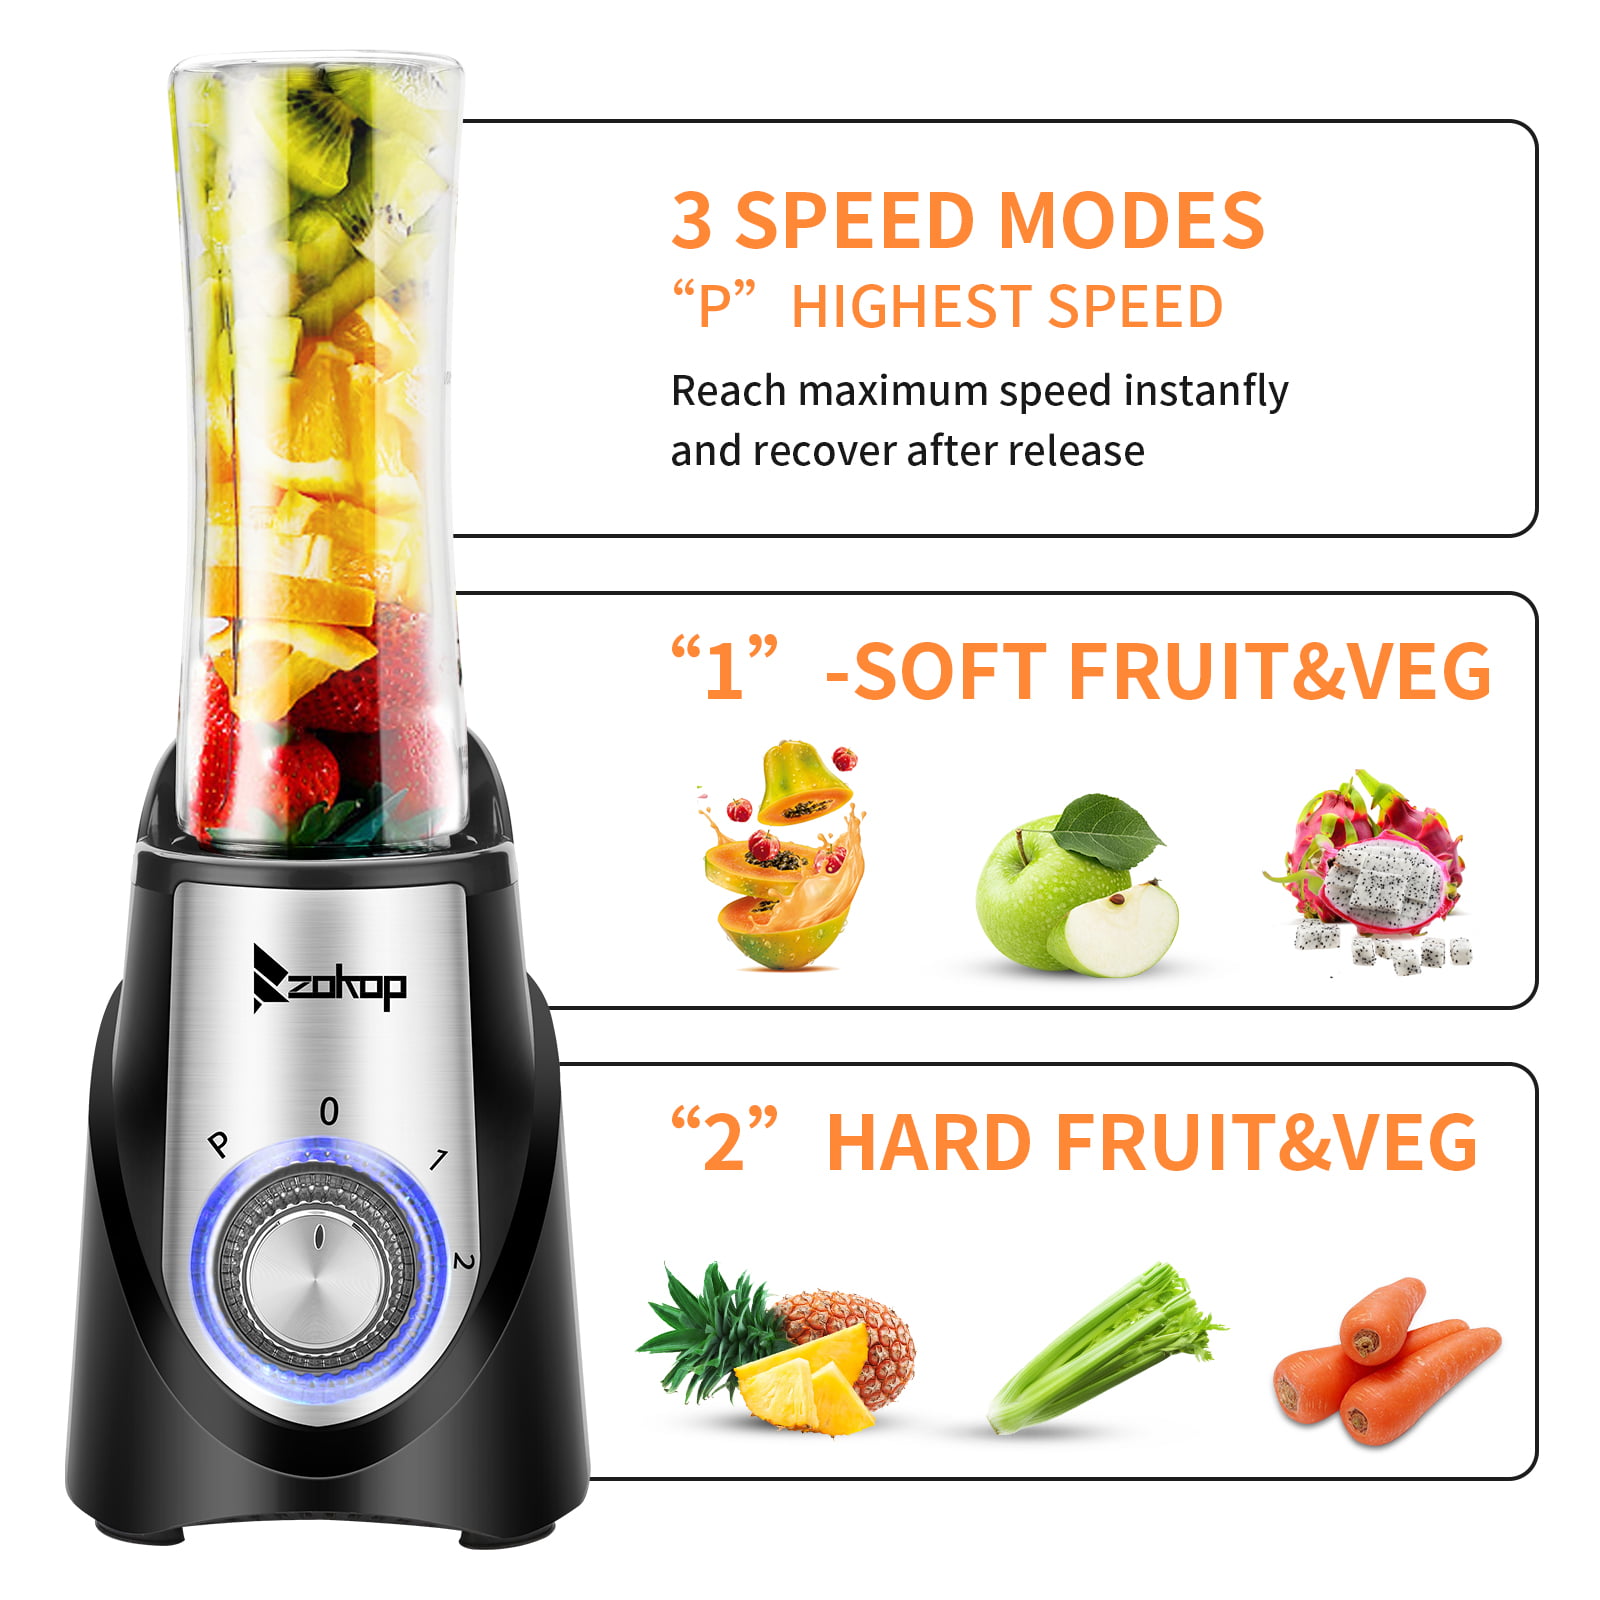 HERRCHEF Smoothie Blender, Blender for Shakes and Smoothies, 350W Powerful  Personal Blender with 2 x 20oz Portable Bottle, Single Blender Easy To